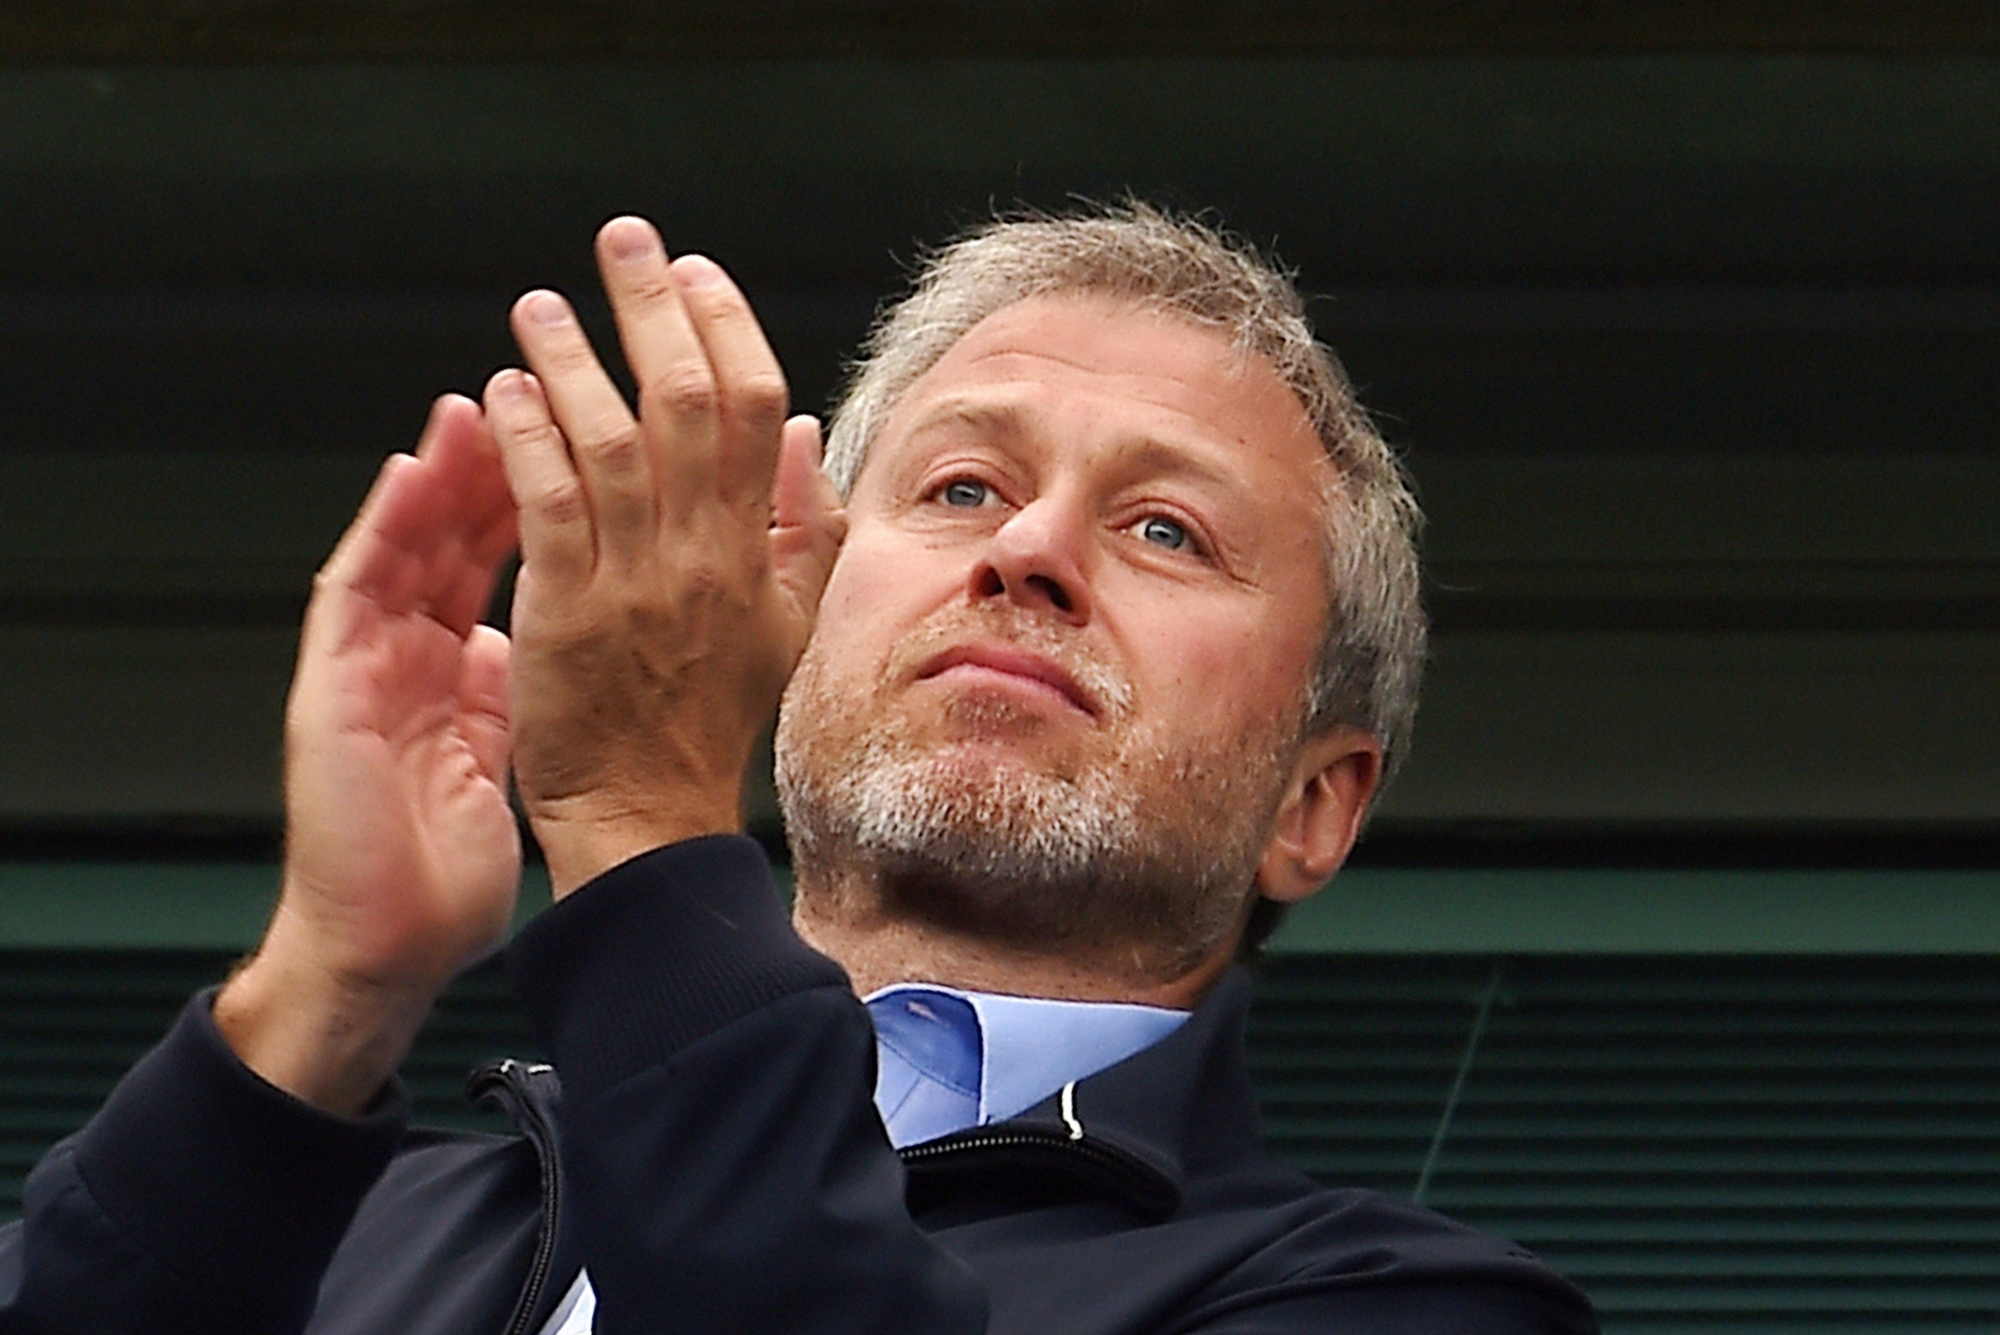 epa05978897 Chelsea owner Roman Abramovich  applauds his players during the English Premier League soccer match between Chlesea FC and Sunderland at Stamford Bridge in London, Britain, 21 May 2017.  EPA/ANDY RAIN EDITORIAL USE ONLY. No use with unauthorized audio, video, data, fixture lists, club/league logos or 'live' service. Online in-match use limited to 75 images, no video emulation. No use in betting, games or single club/league/player publications    EDITORI  EDITORIAL USE ONLY  EDITORIAL USE ONLY GROSSBRITANNIEN FUSSBALL PREMIER LEAGUE